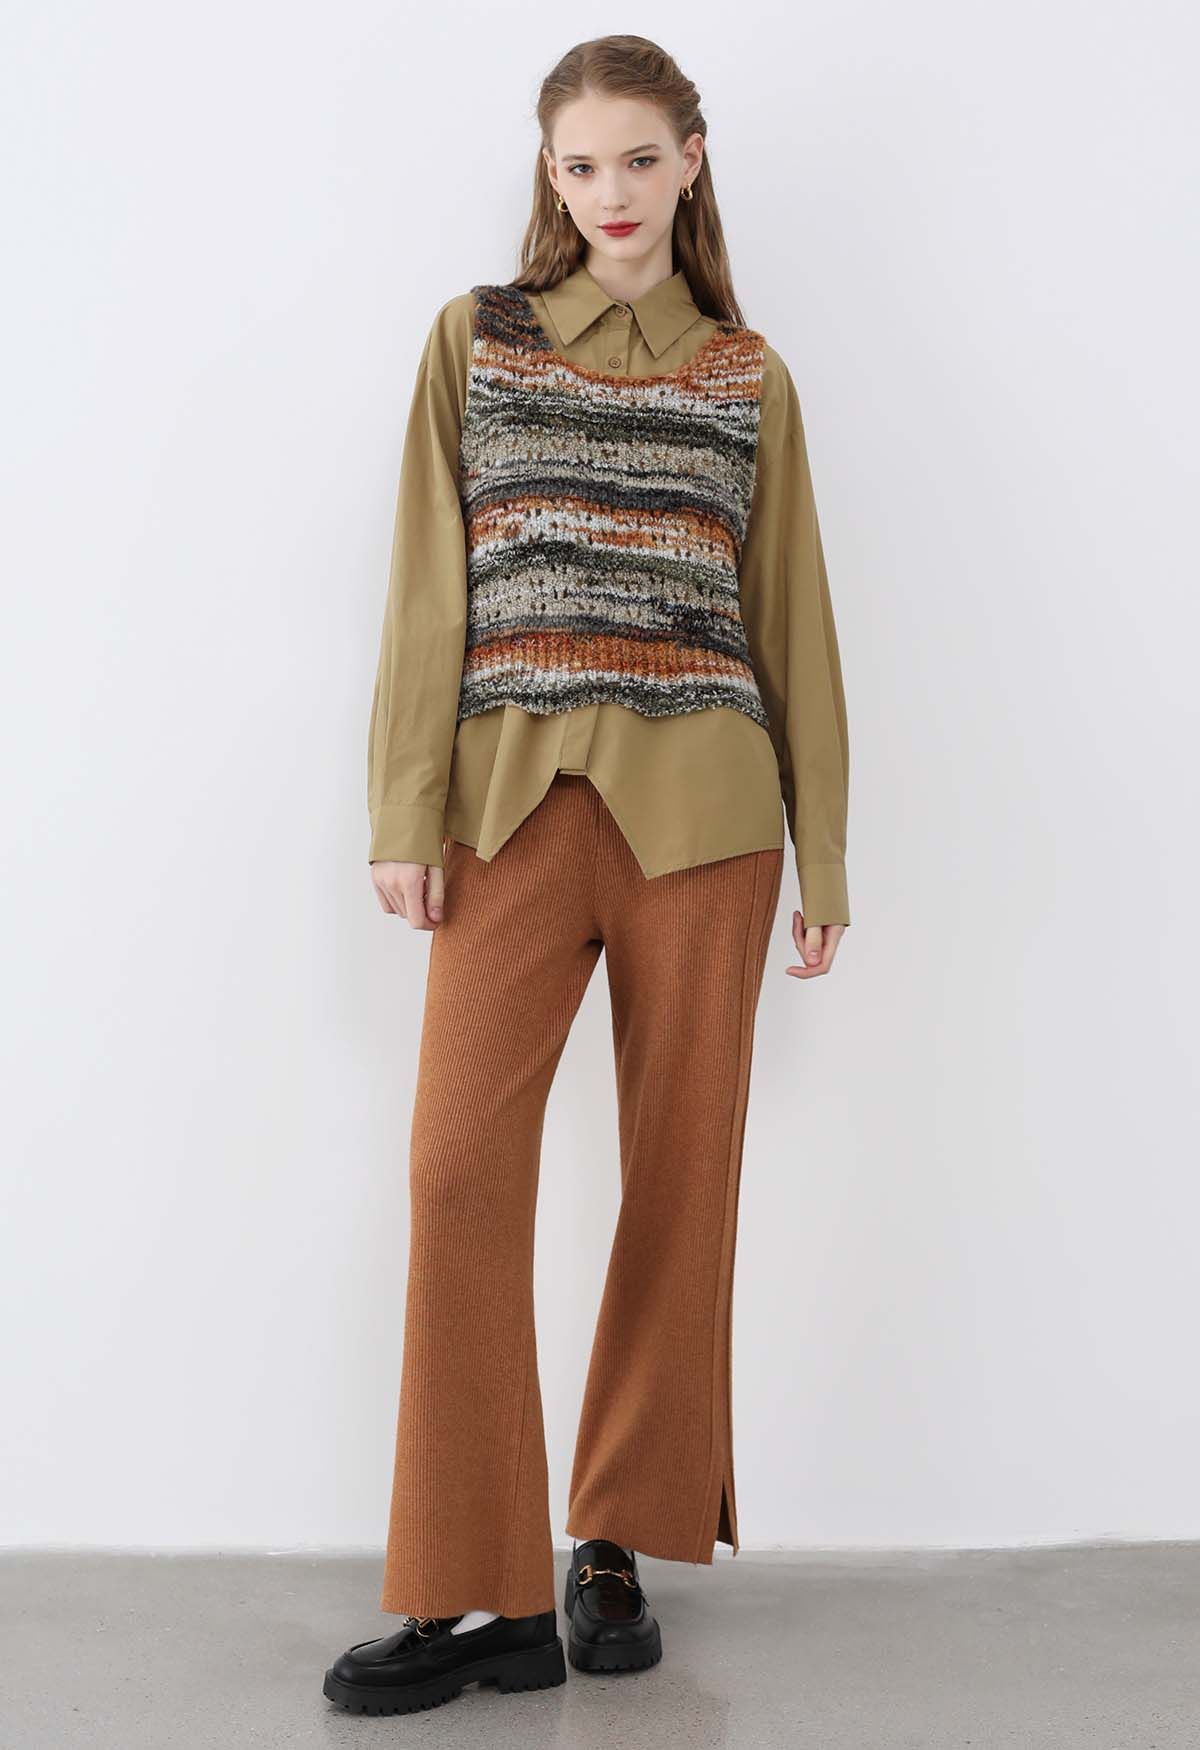 Multicolor Stripes Hollow Out Knit Vest in Camel